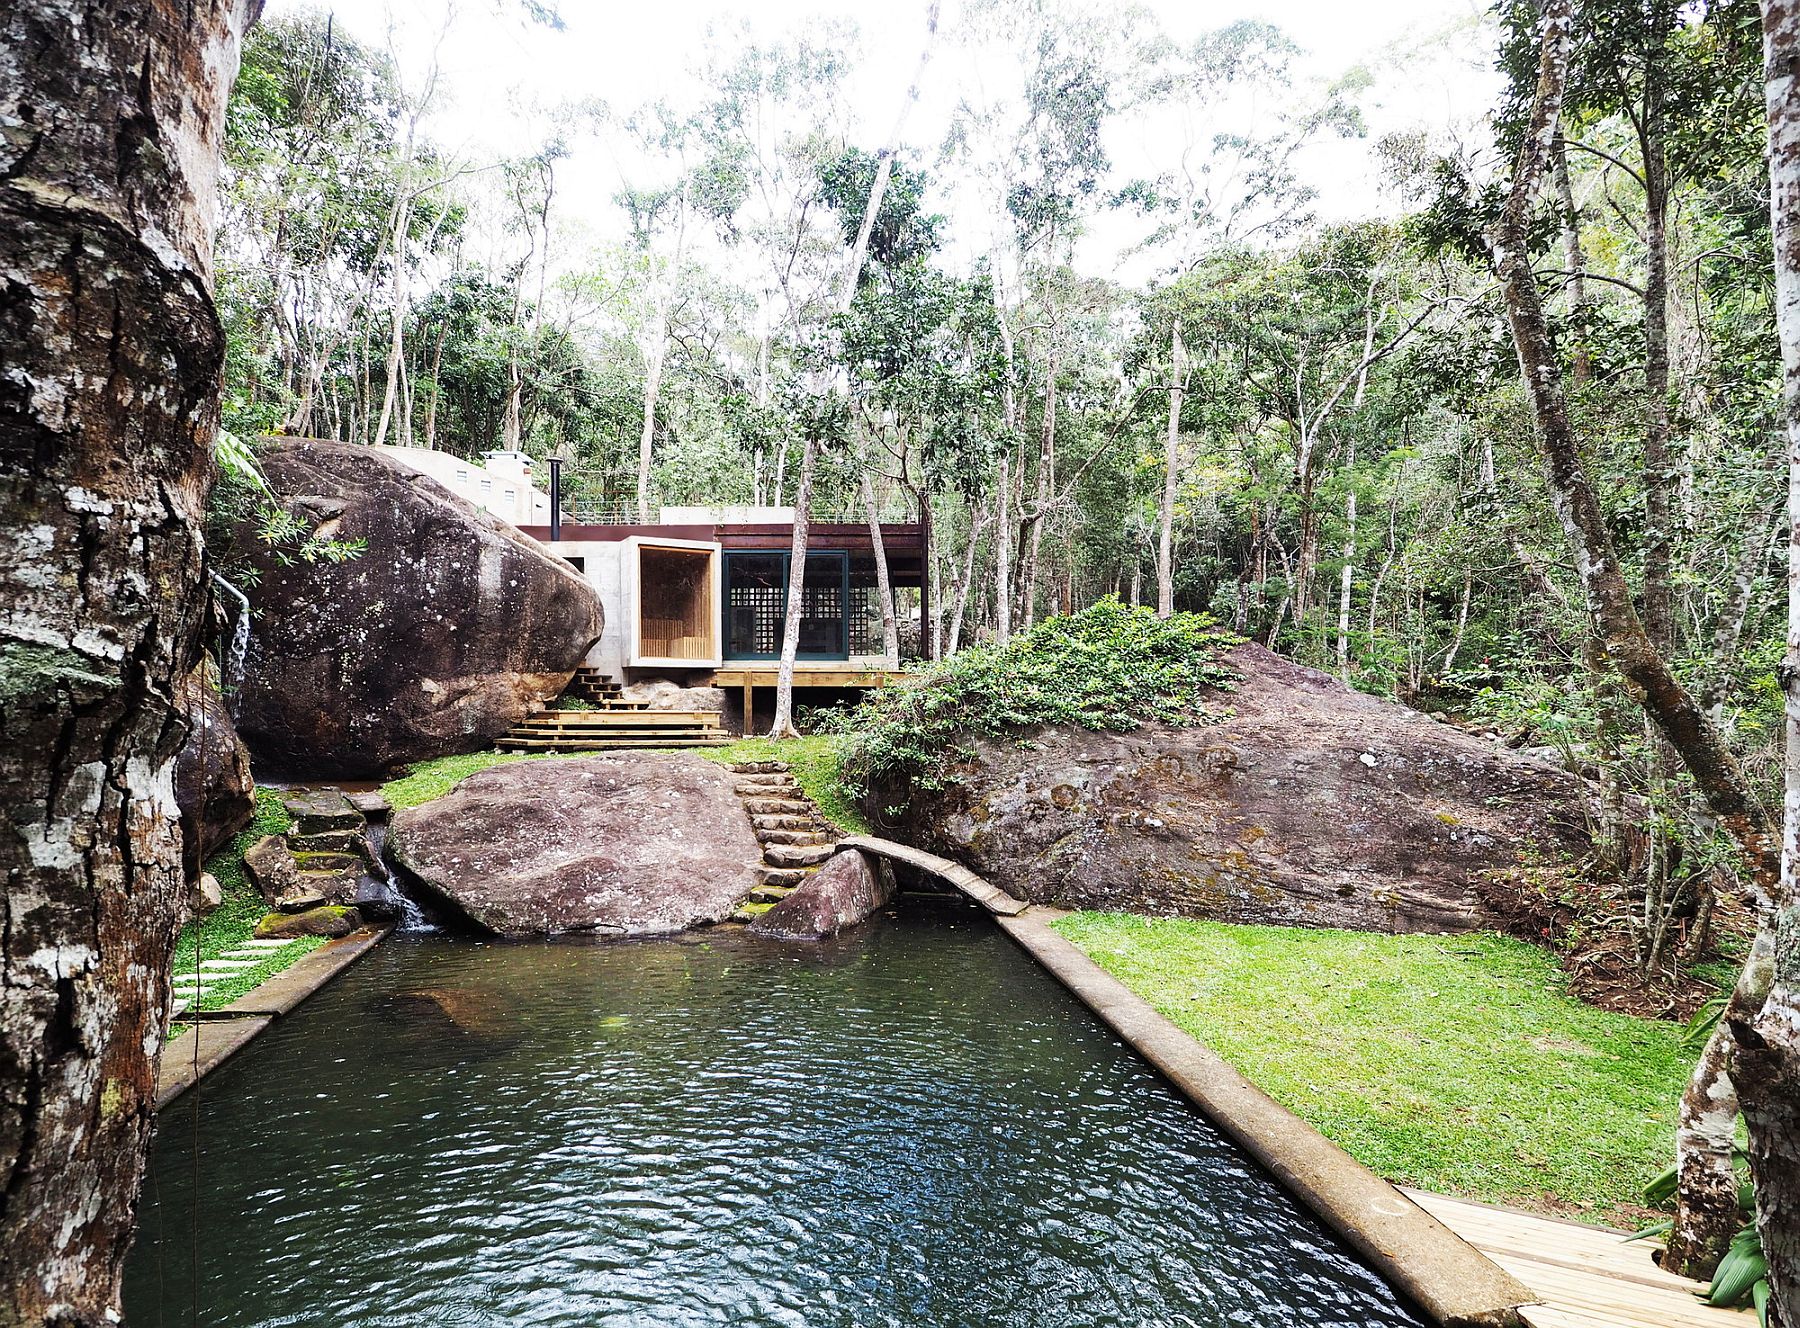 Modern pavilion set next to a natural swimming pool surrounded by lush green landscape